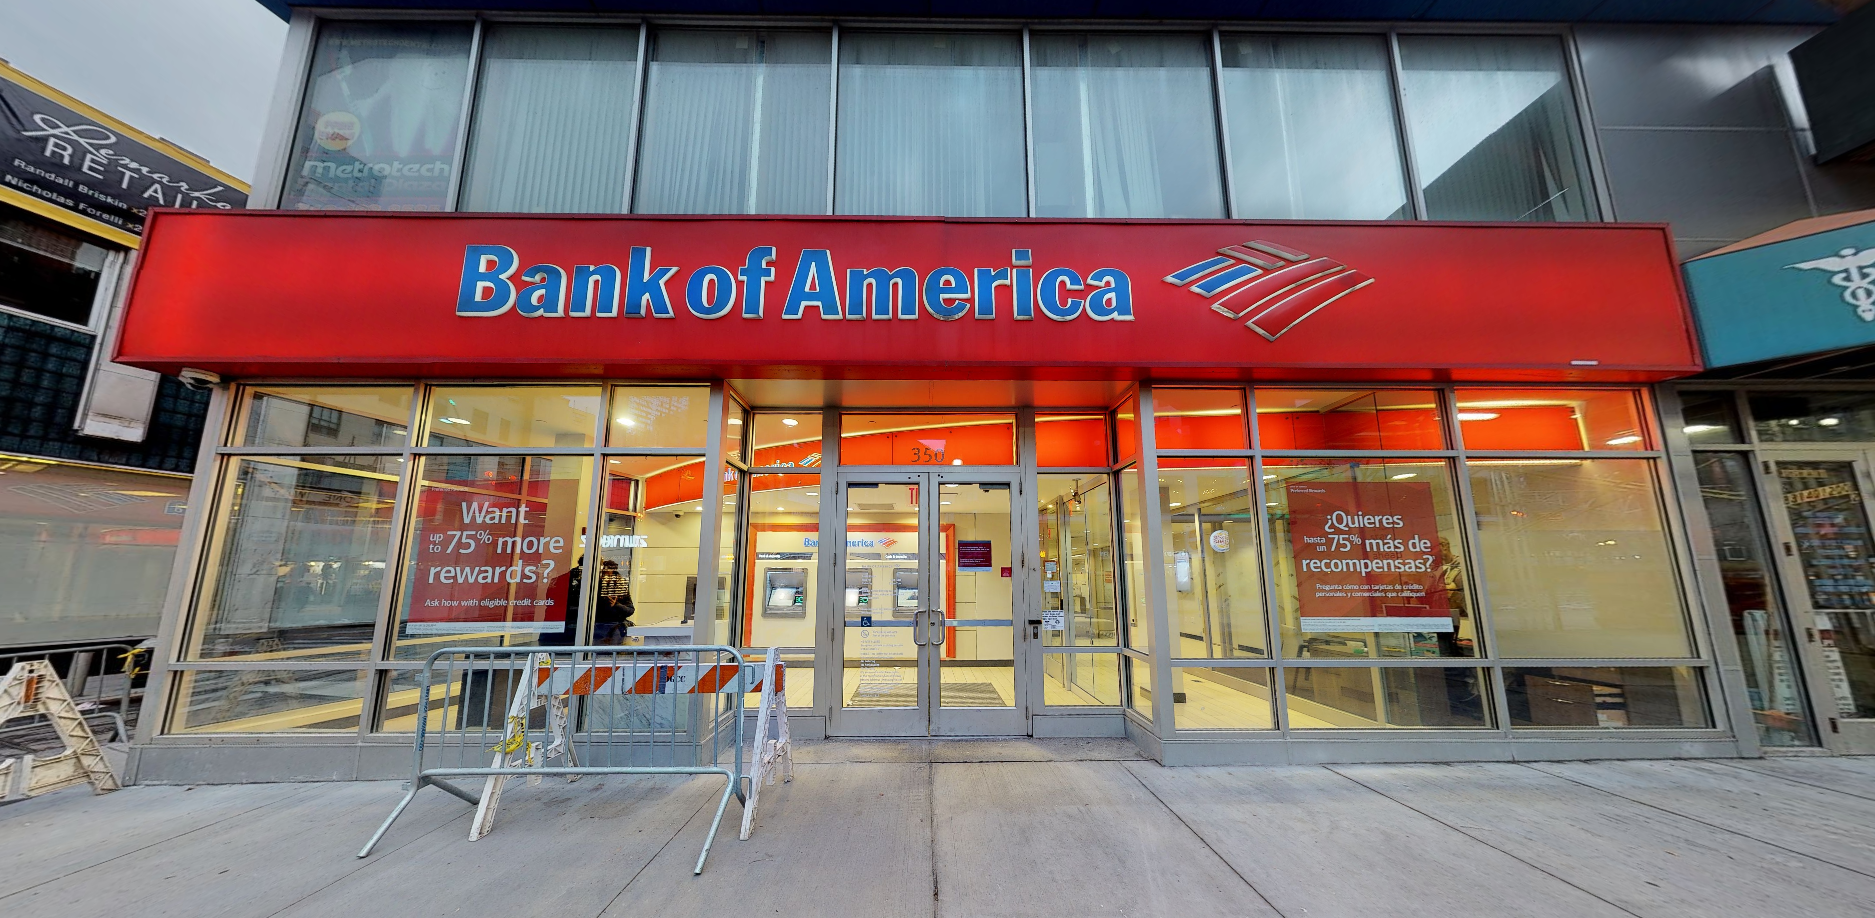 Bank of America financial center with walk-up ATM | 350 Fulton St, Brooklyn, NY 11201